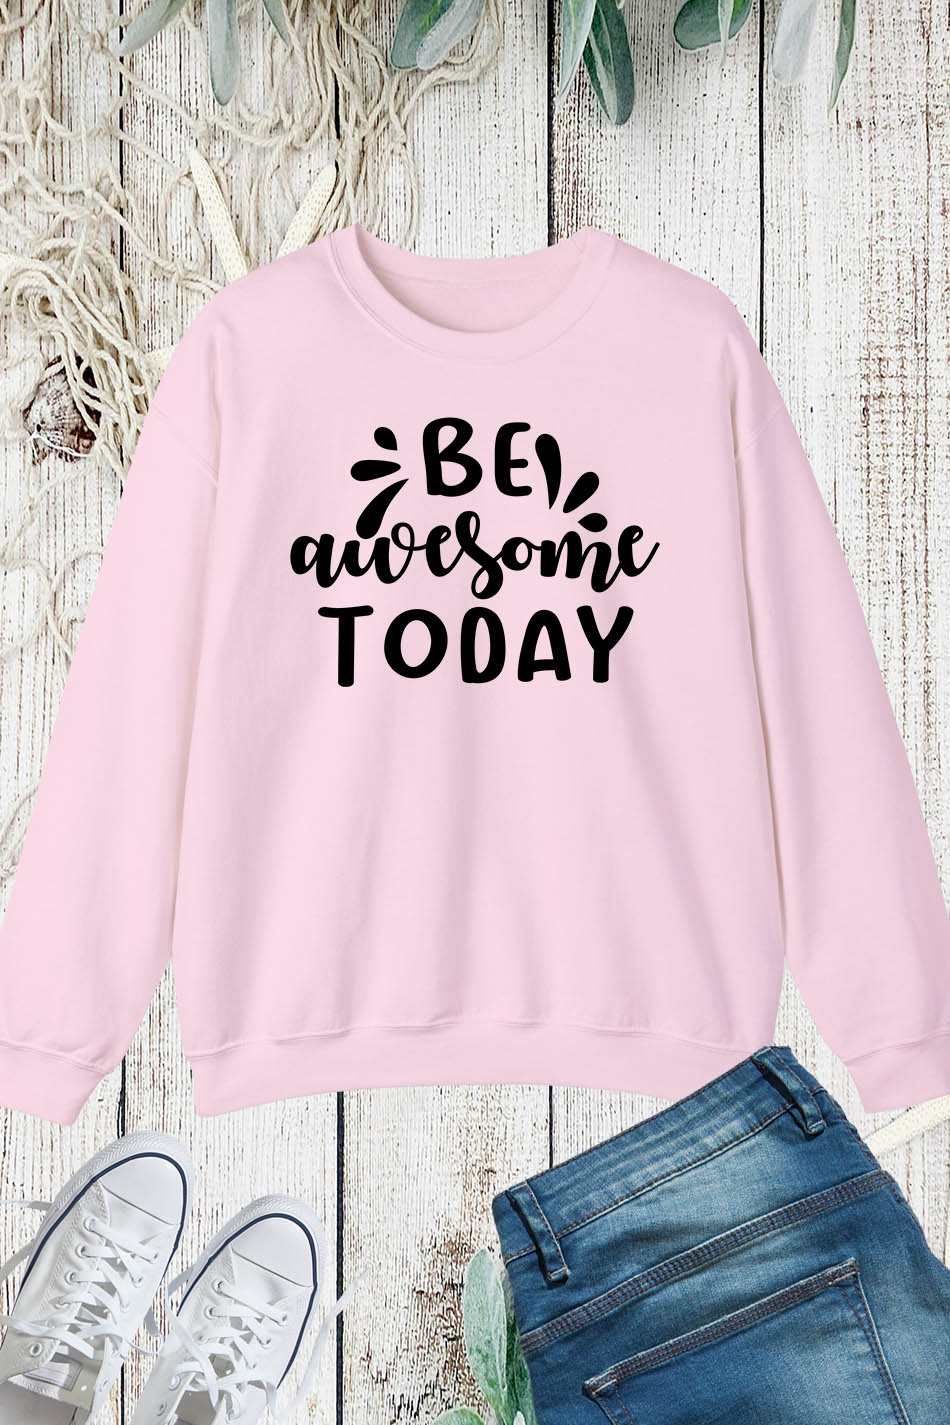 Be Awesome Today Social Worker Motivation Sweatshirts